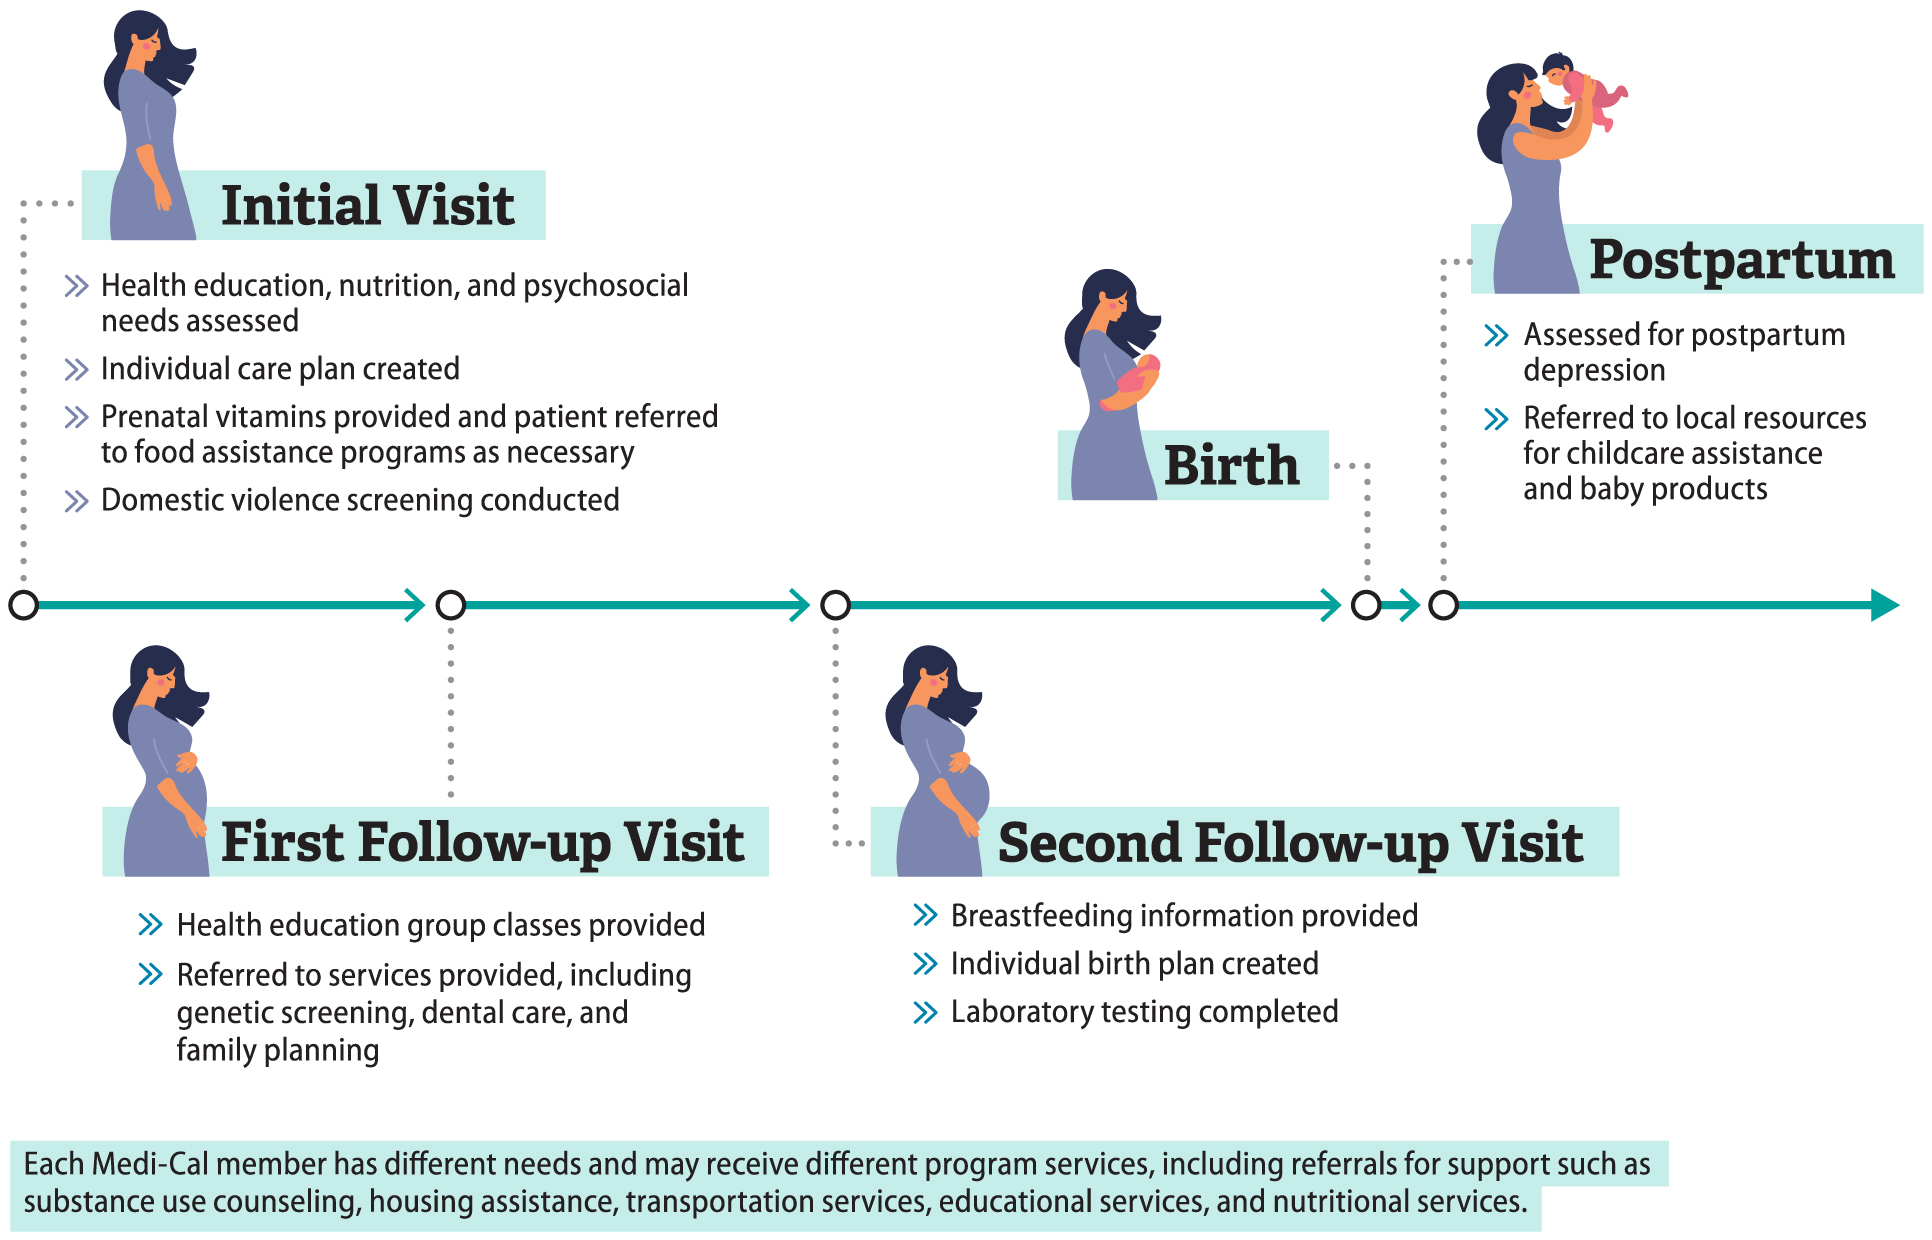 A timeline from a member’s initial visit to the postpartum period, describing a variety of perinatal services they may receive under the program